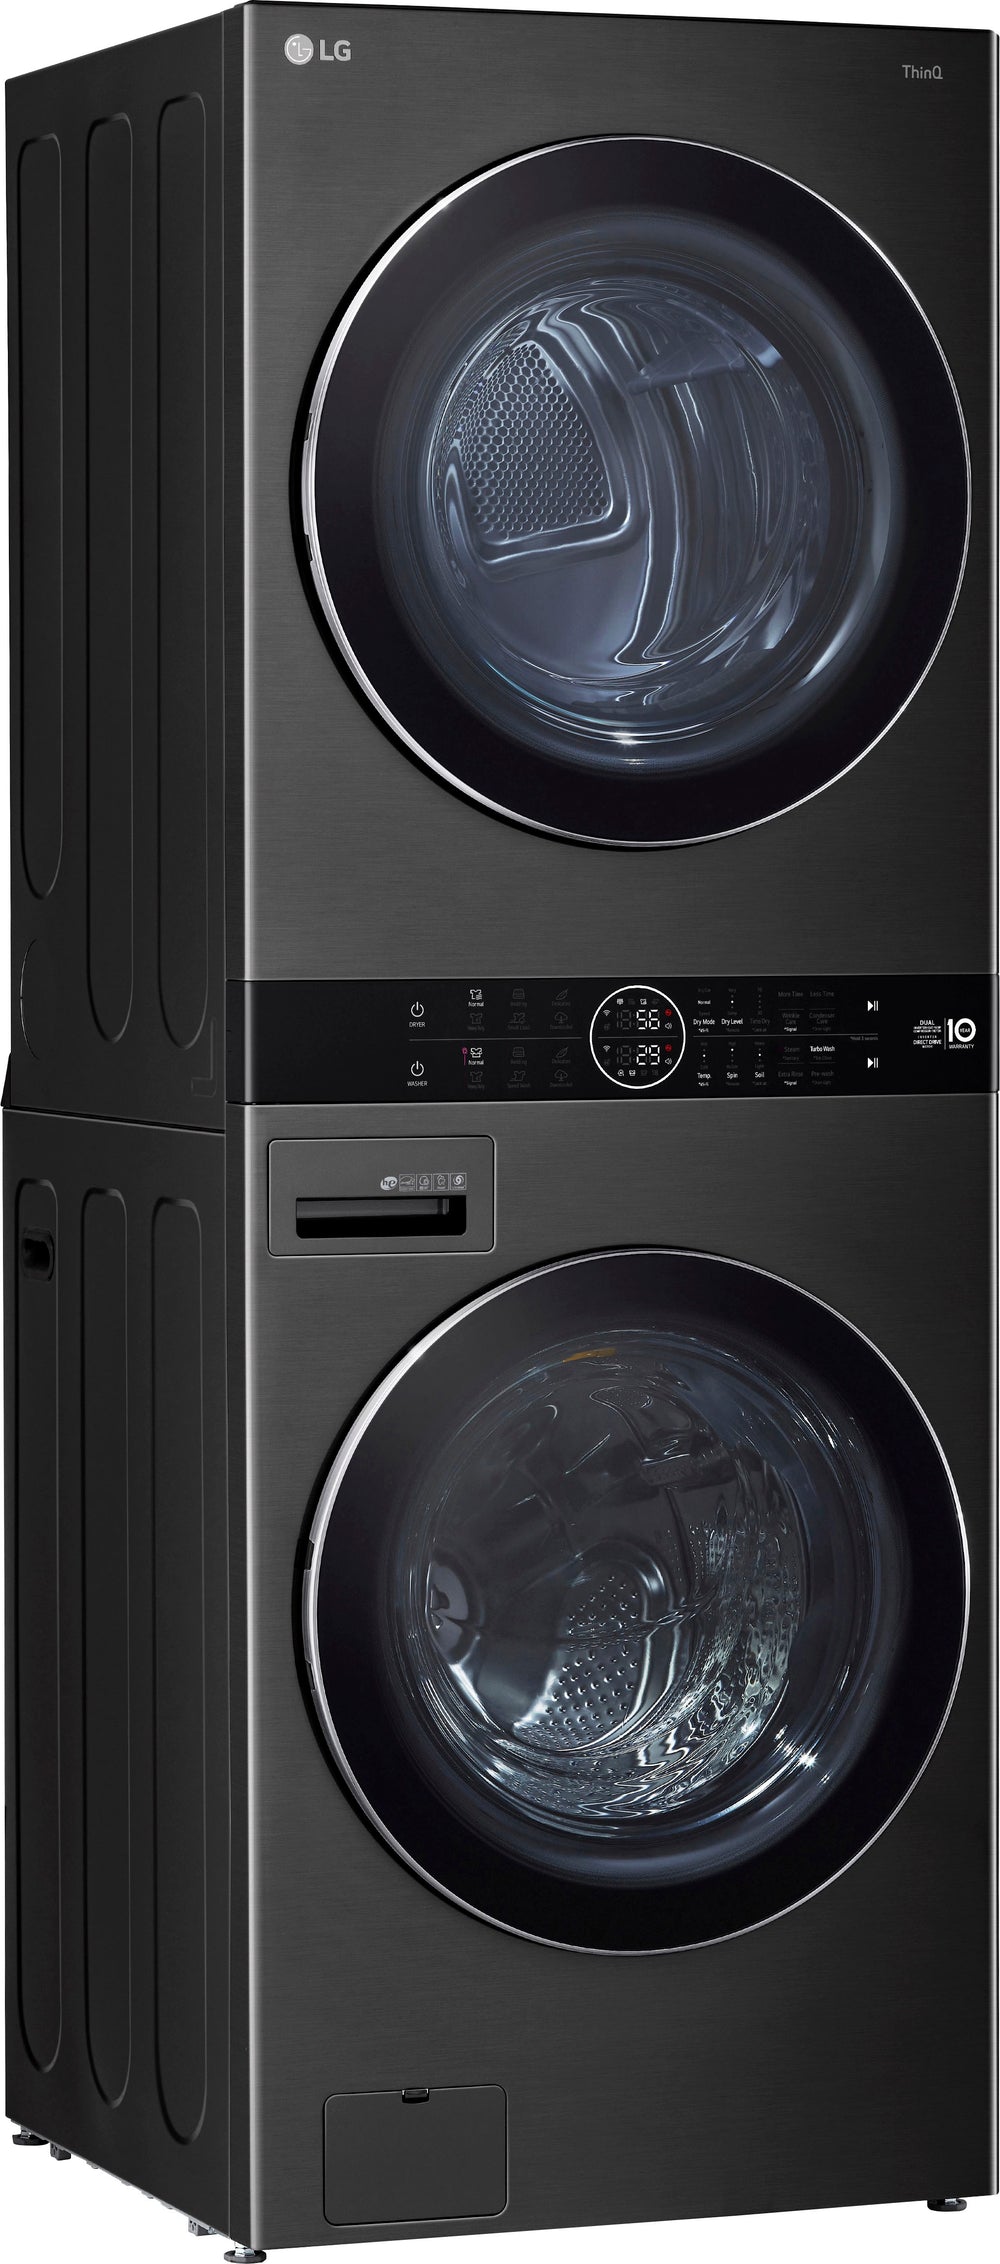 LG - 4.5 Cu. Ft. HE Smart Front Load Washer and 7.4 Cu. Ft. Electric Dryer WashTower with Steam and Ventless Dryer - Black Steel_1